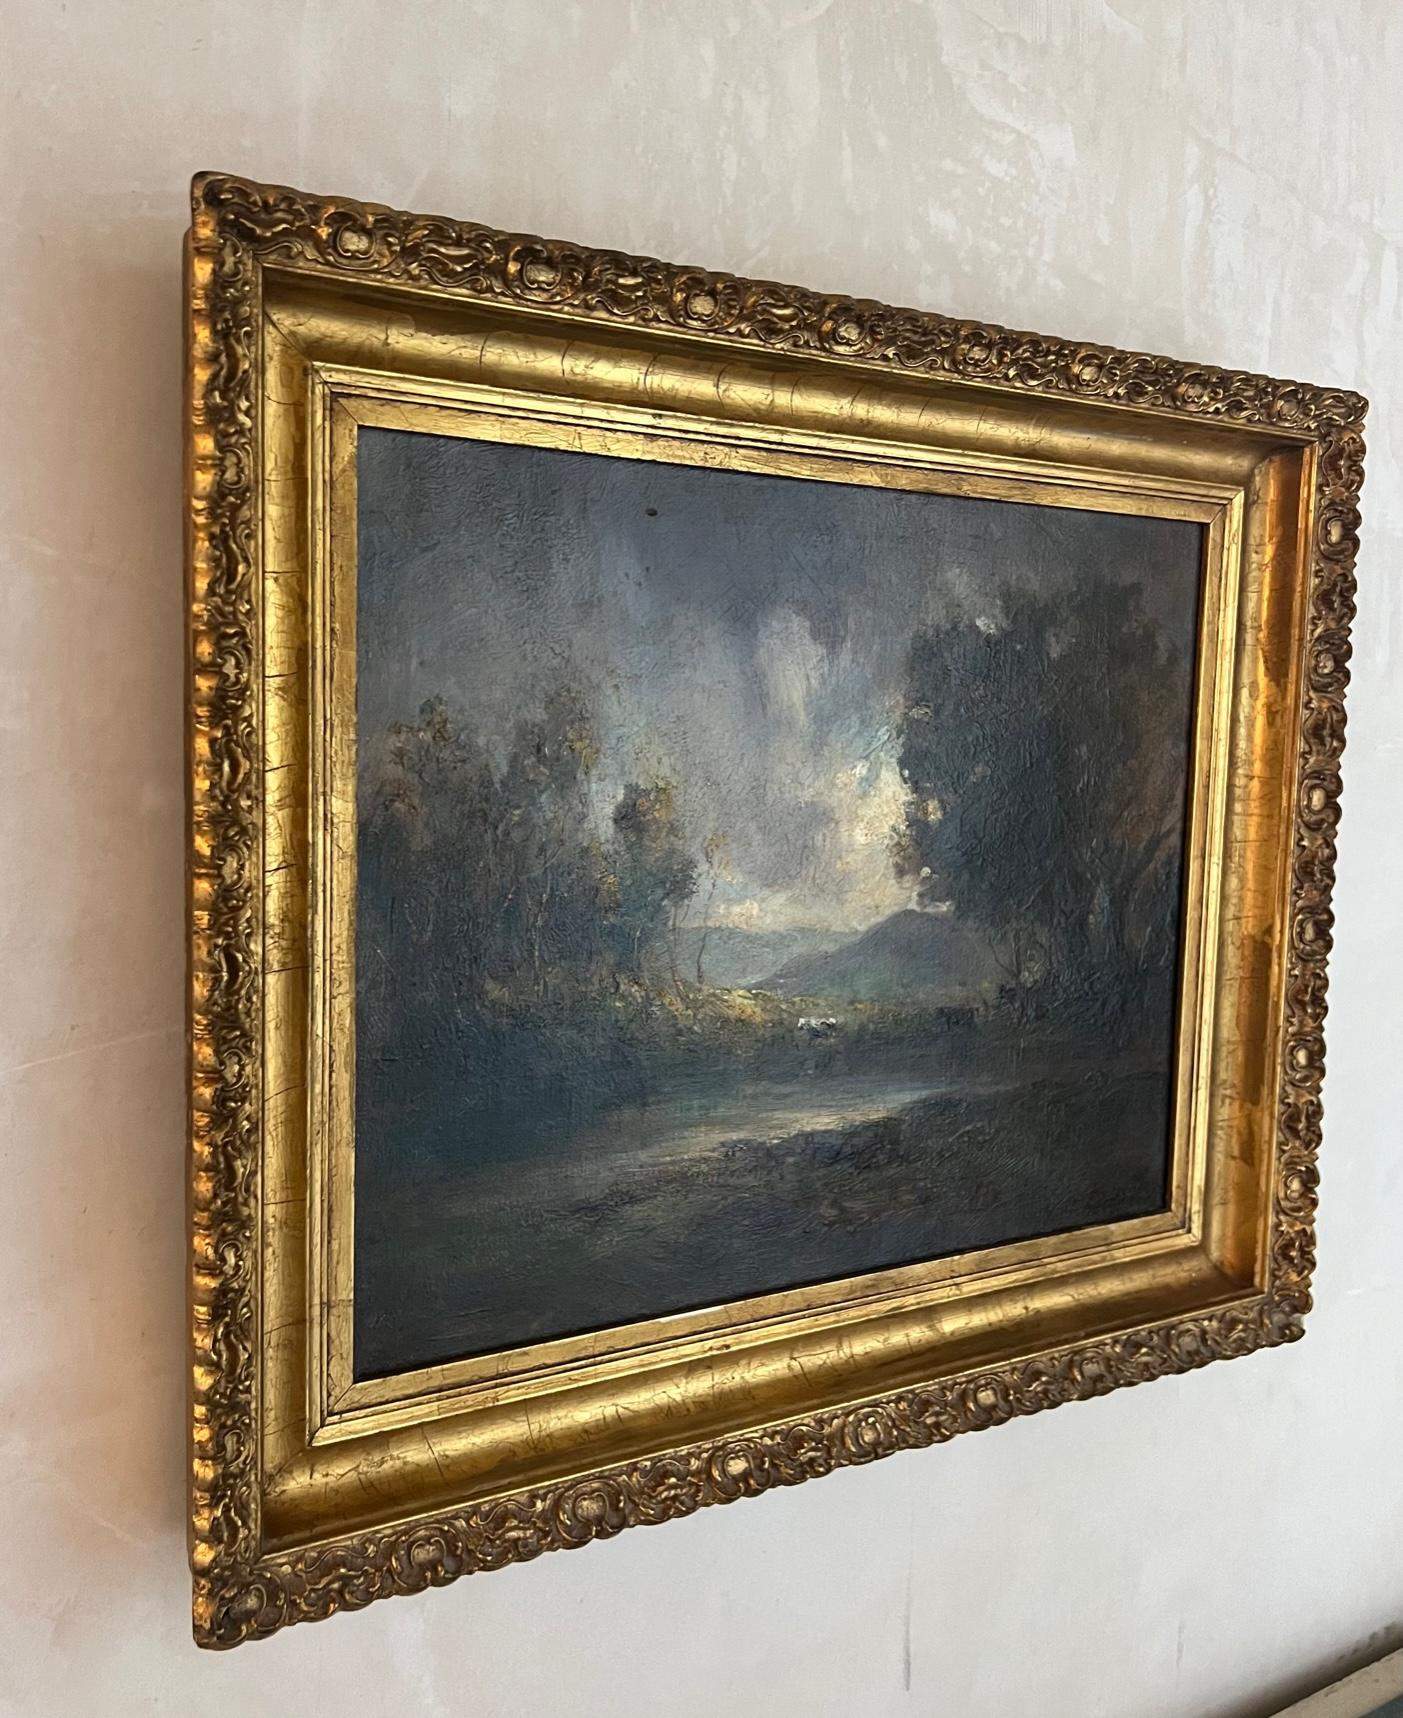 Antique landscape oil painting by James Martin Griffin painted around 1900. The painting shows cows in the forefront with dark clouds with clear skies coming through in the distance. The painting is somewhat dark and the signature is hard to see but